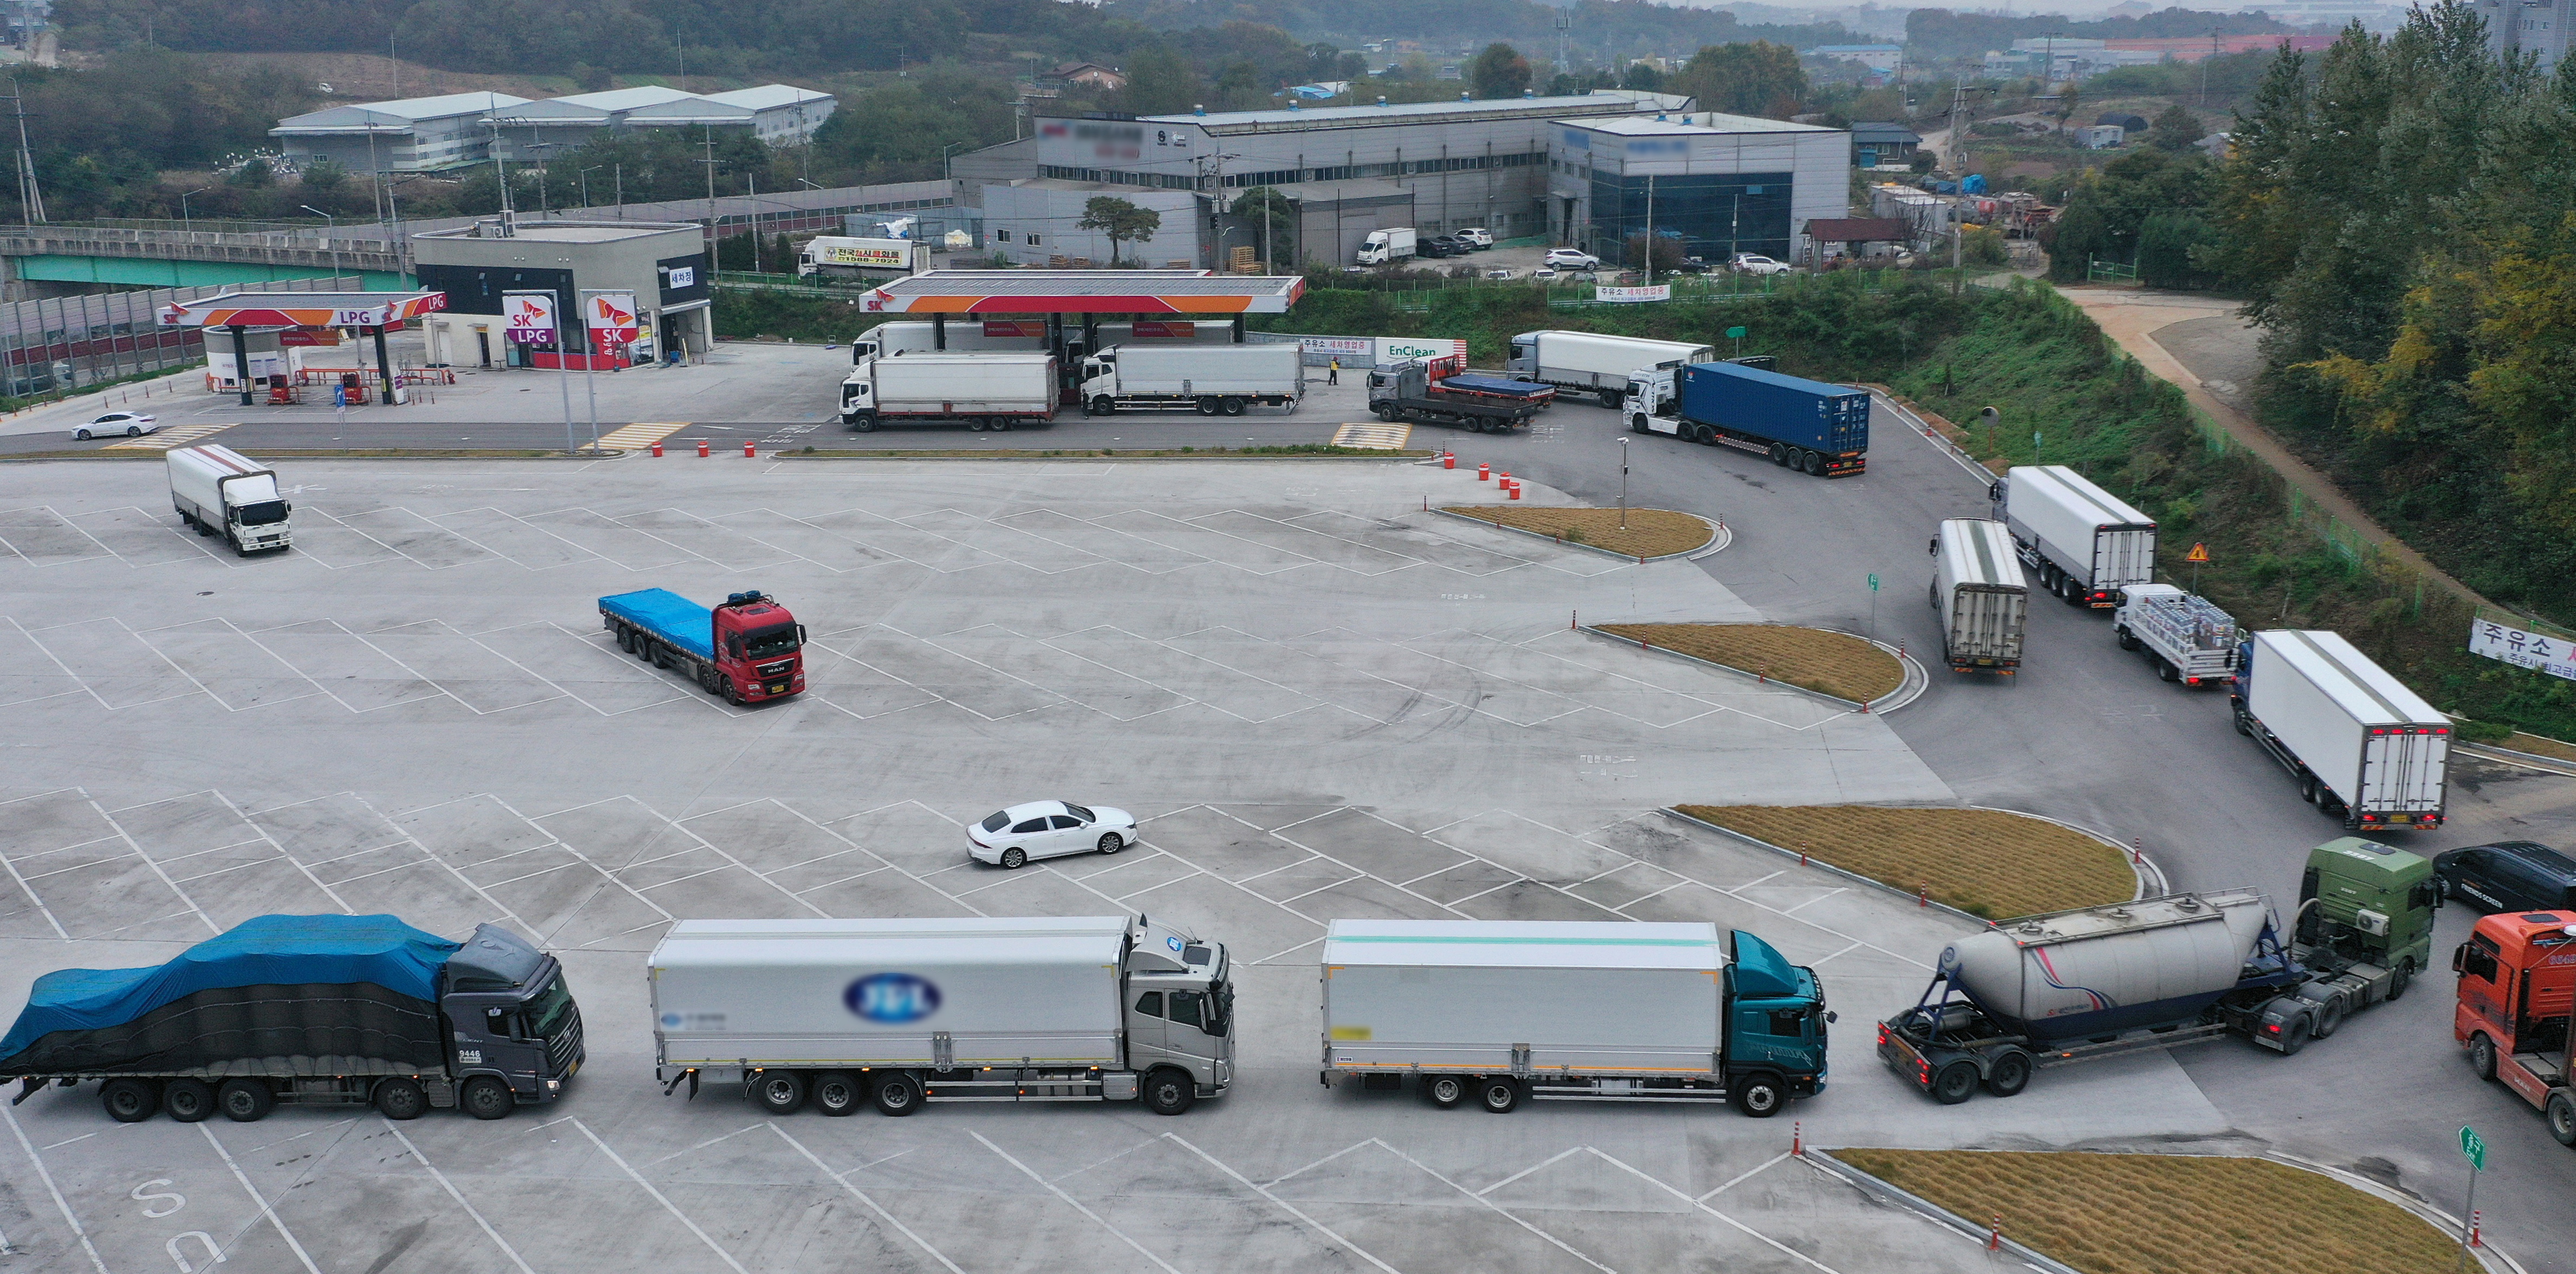 Trucks wait in a line to get urea at a service area in Pyeongtaek